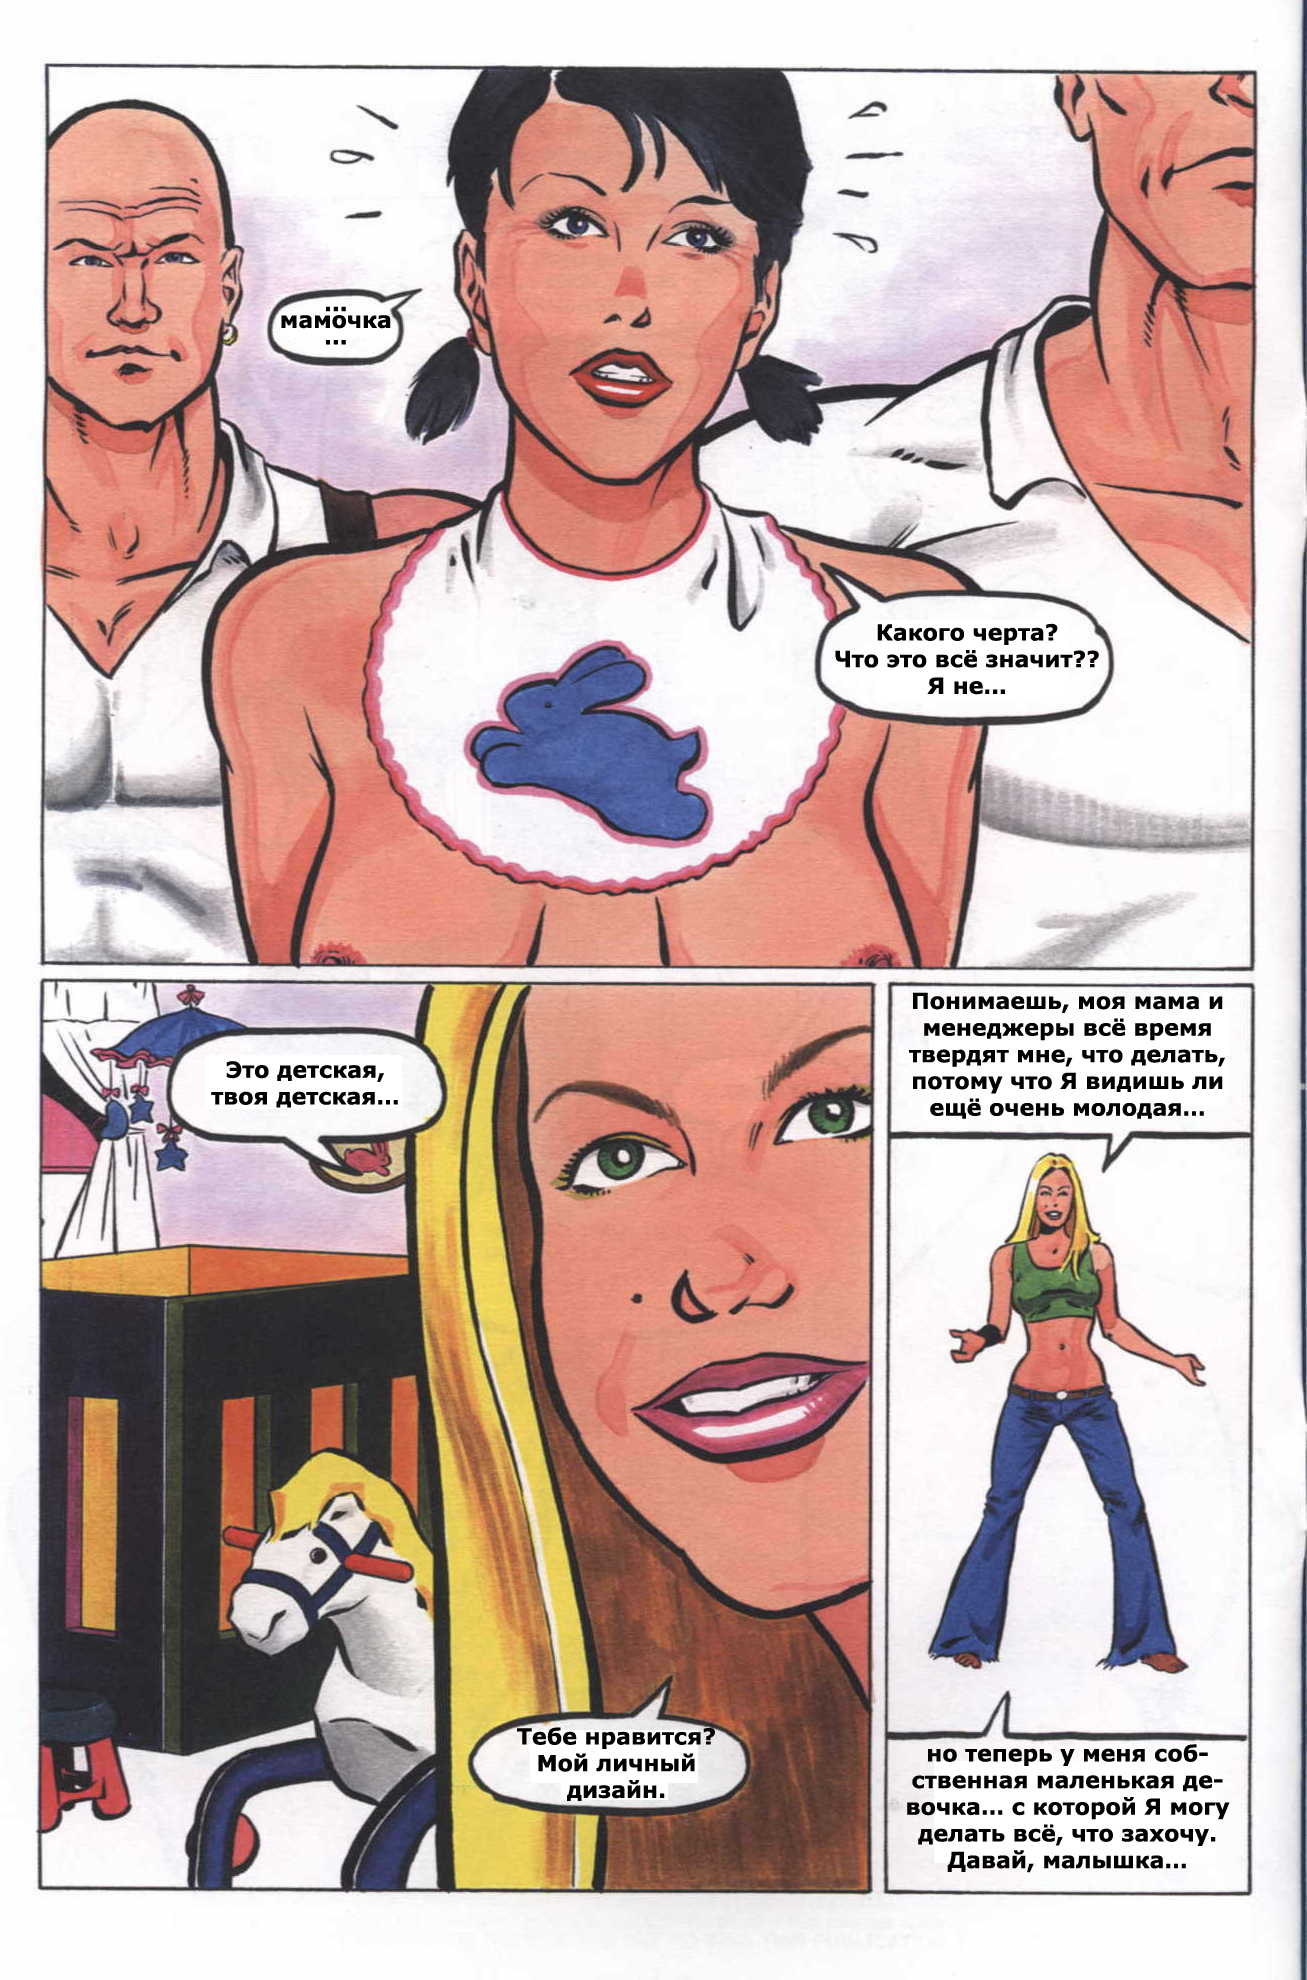 Catherine erotic housewife at play comic